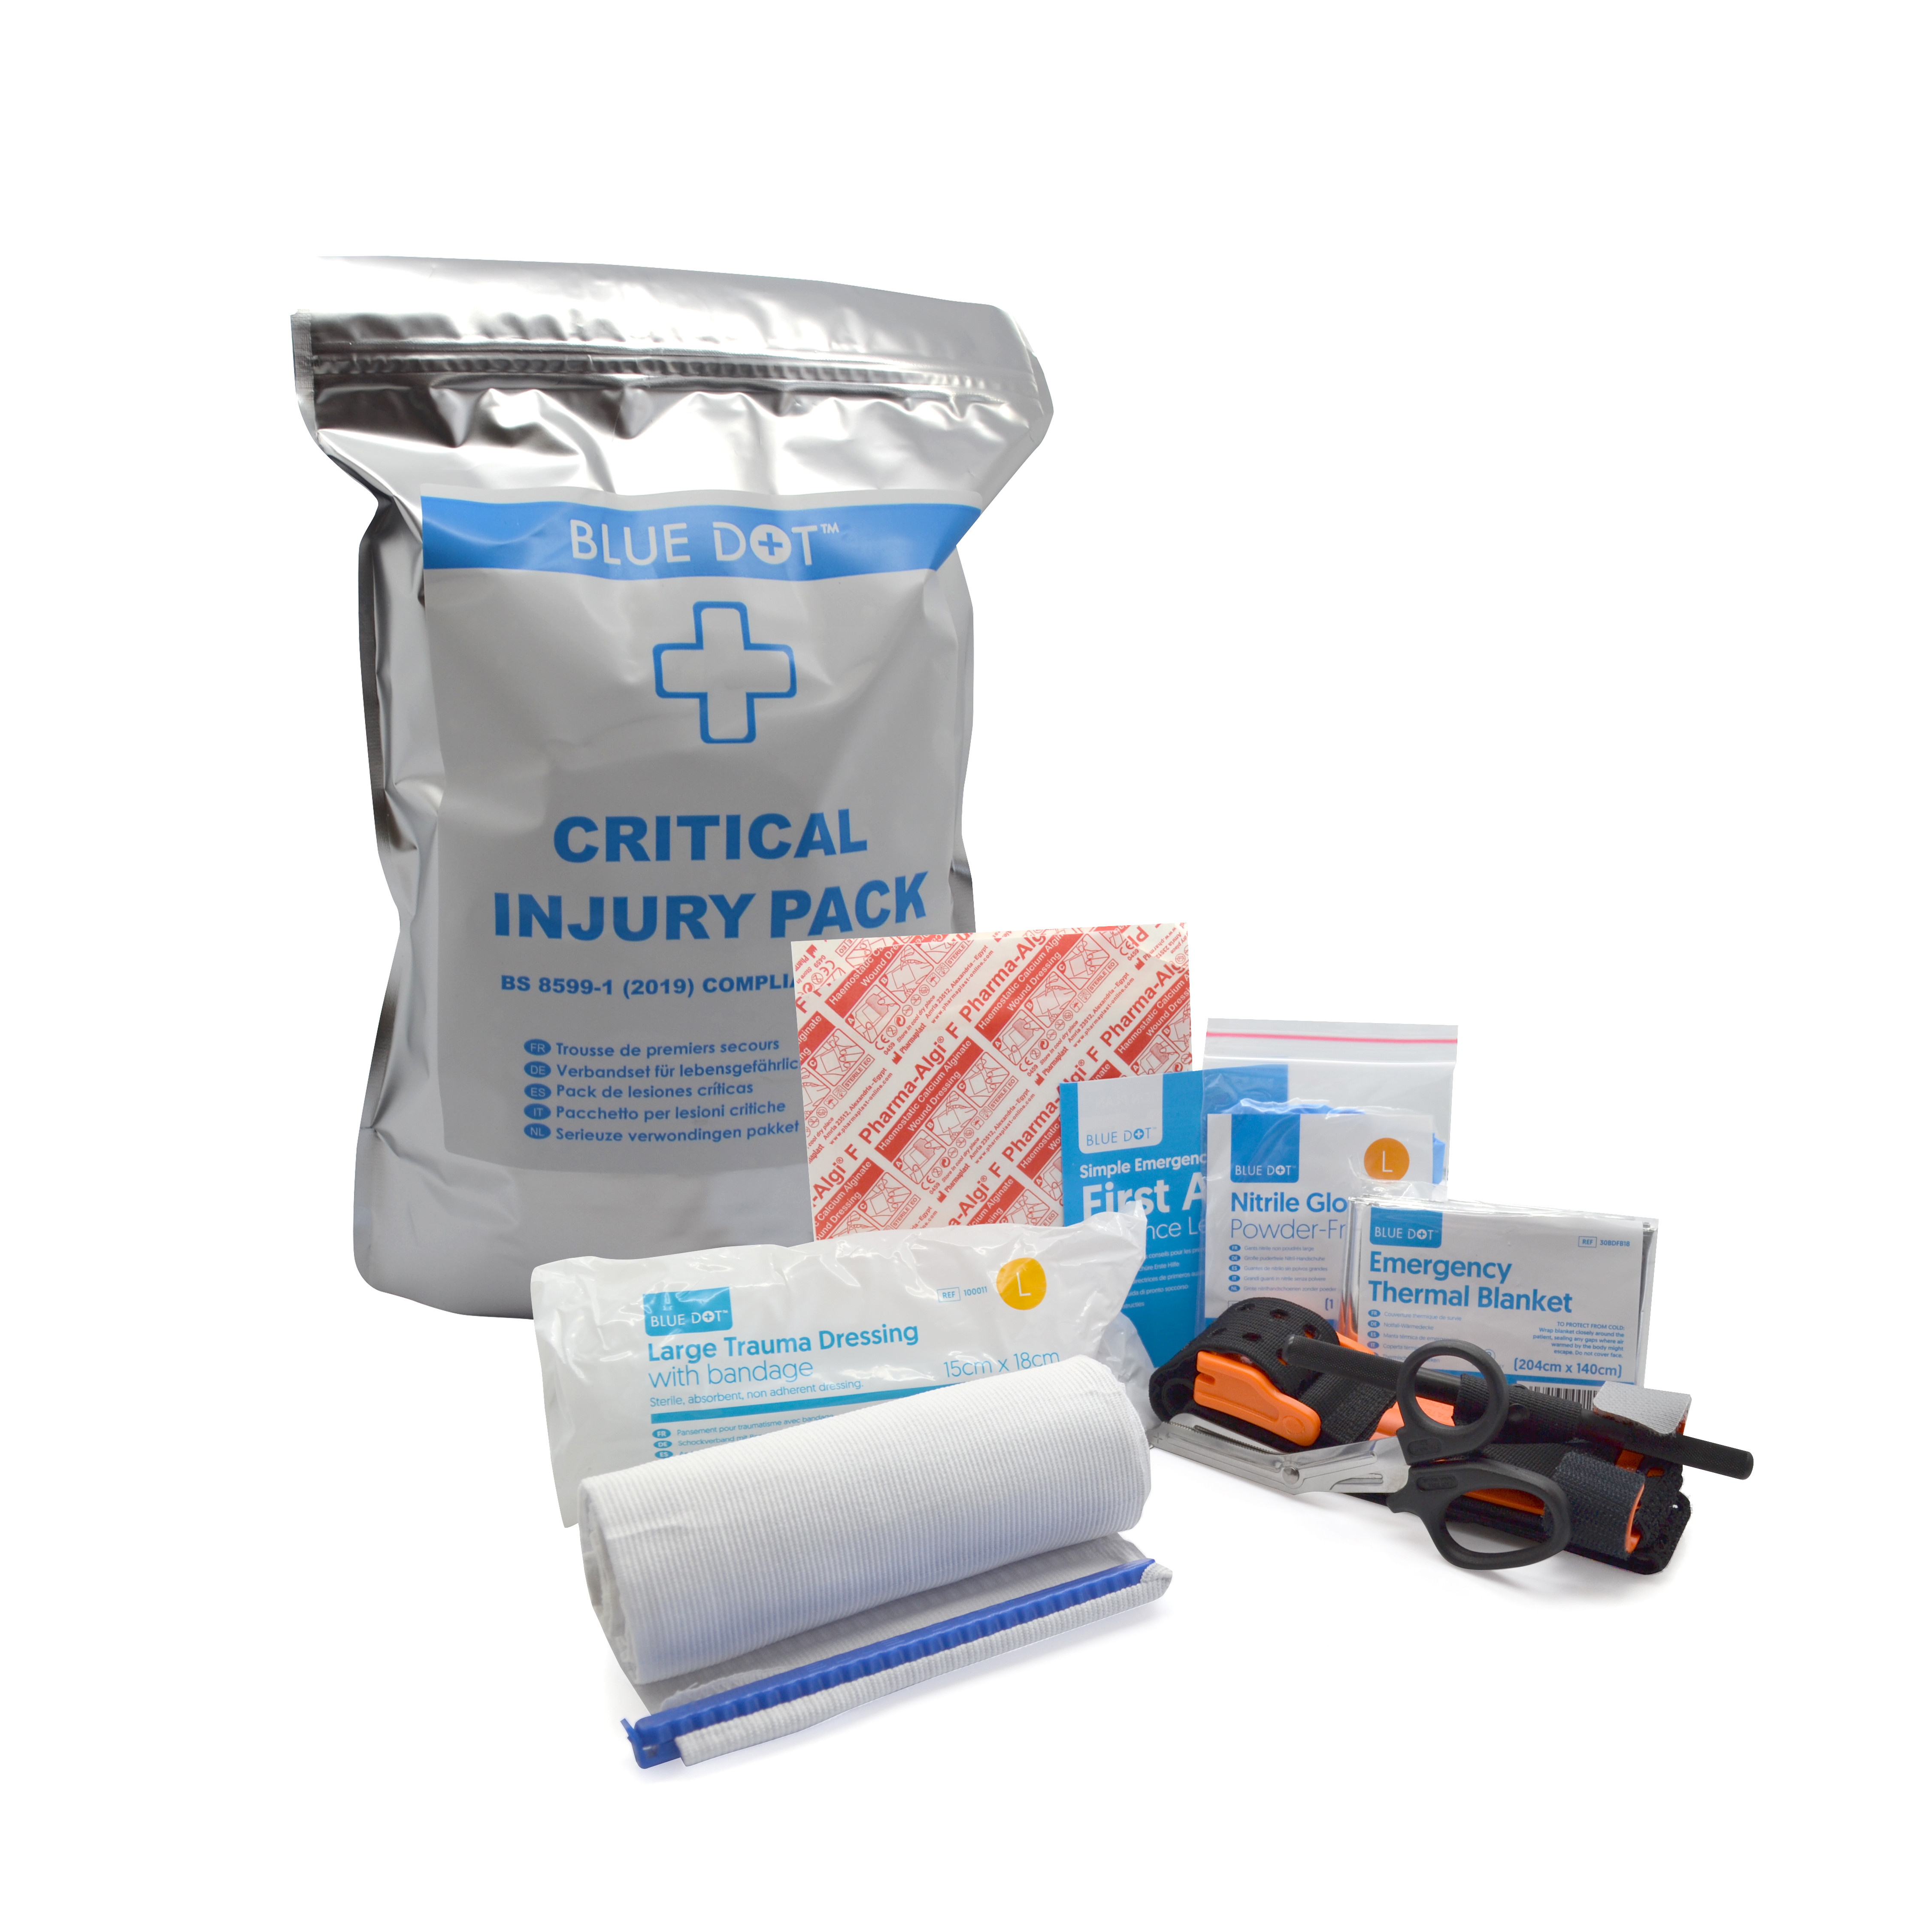 Critical Injury Pack - BS 8599-1:2019 Compliant